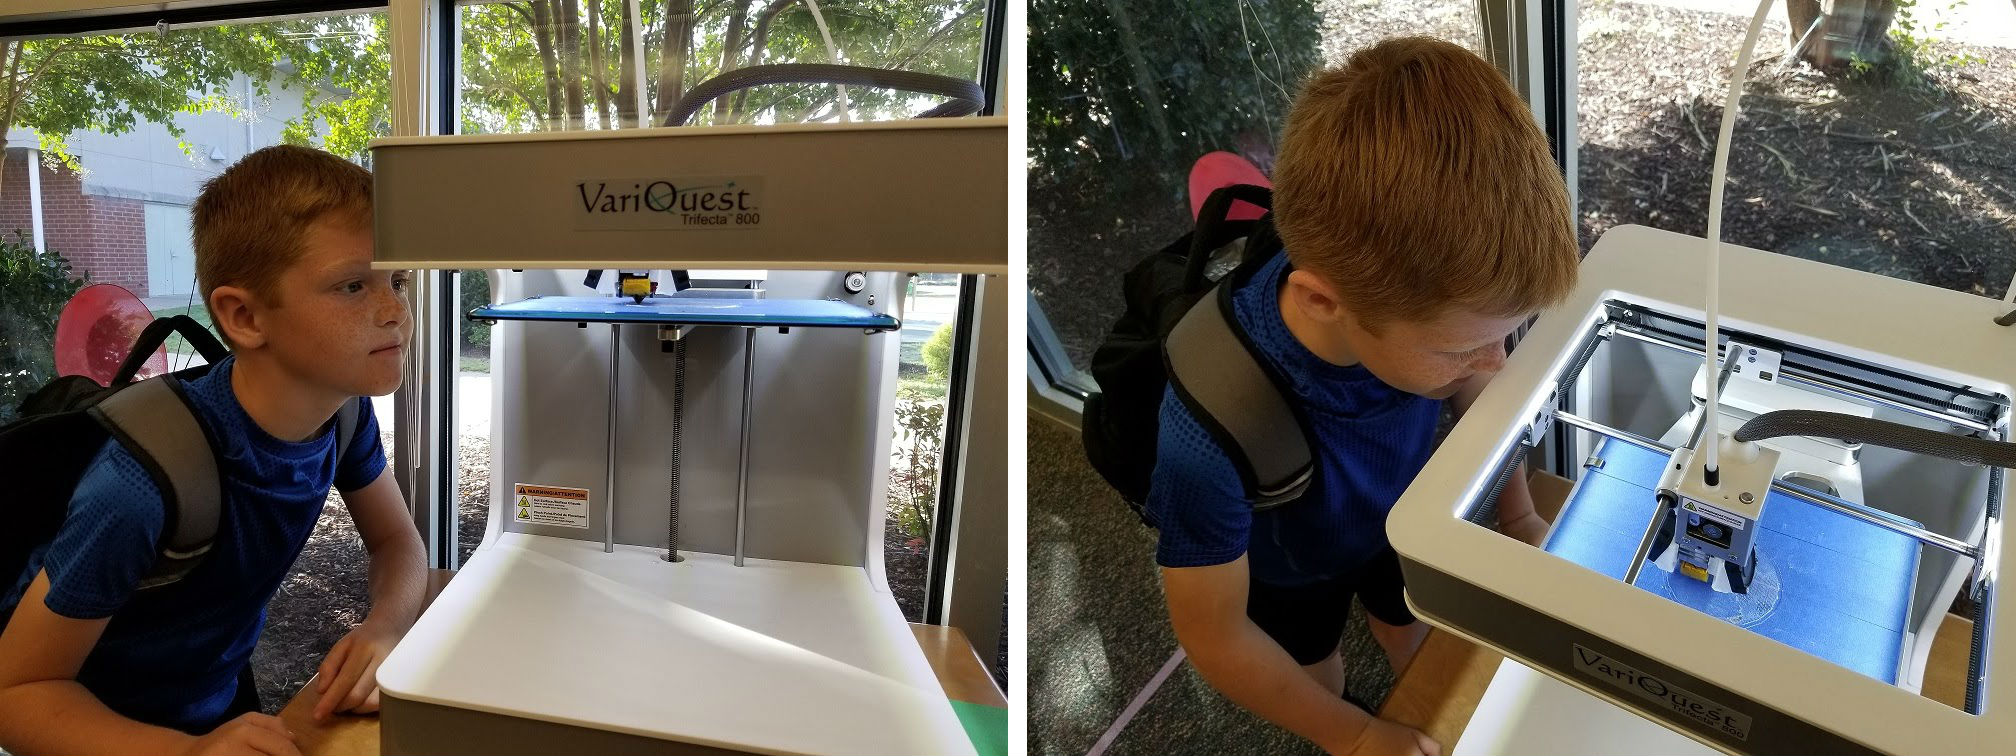 How 3D Printing is Benefiting Education at Holly Grove Elementary